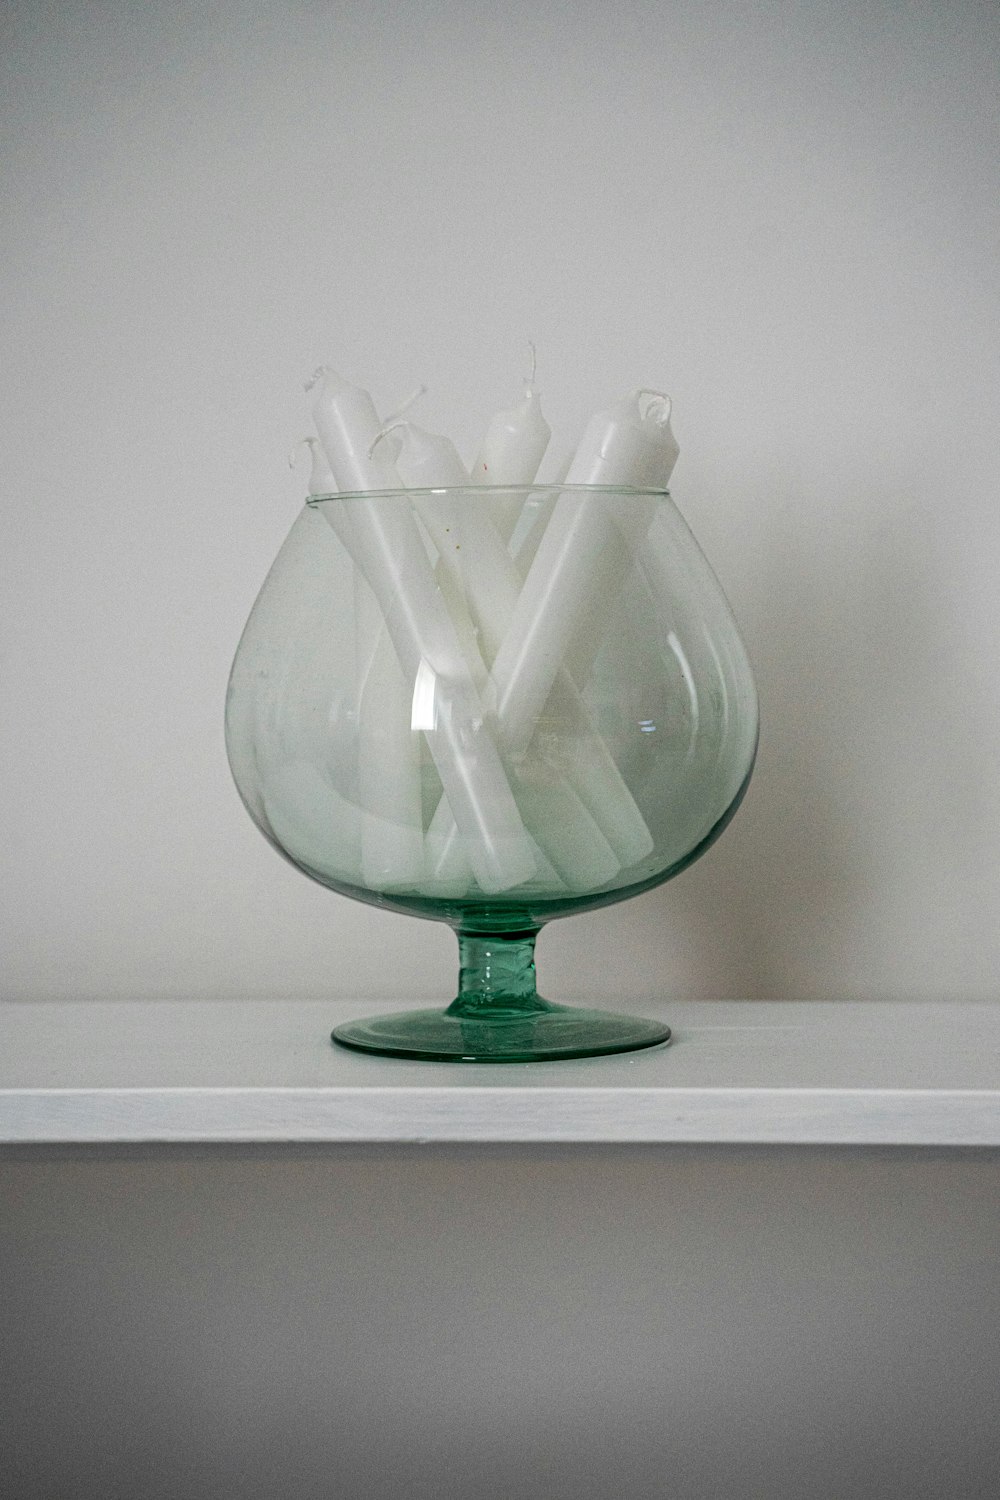 clear glass vase on white table